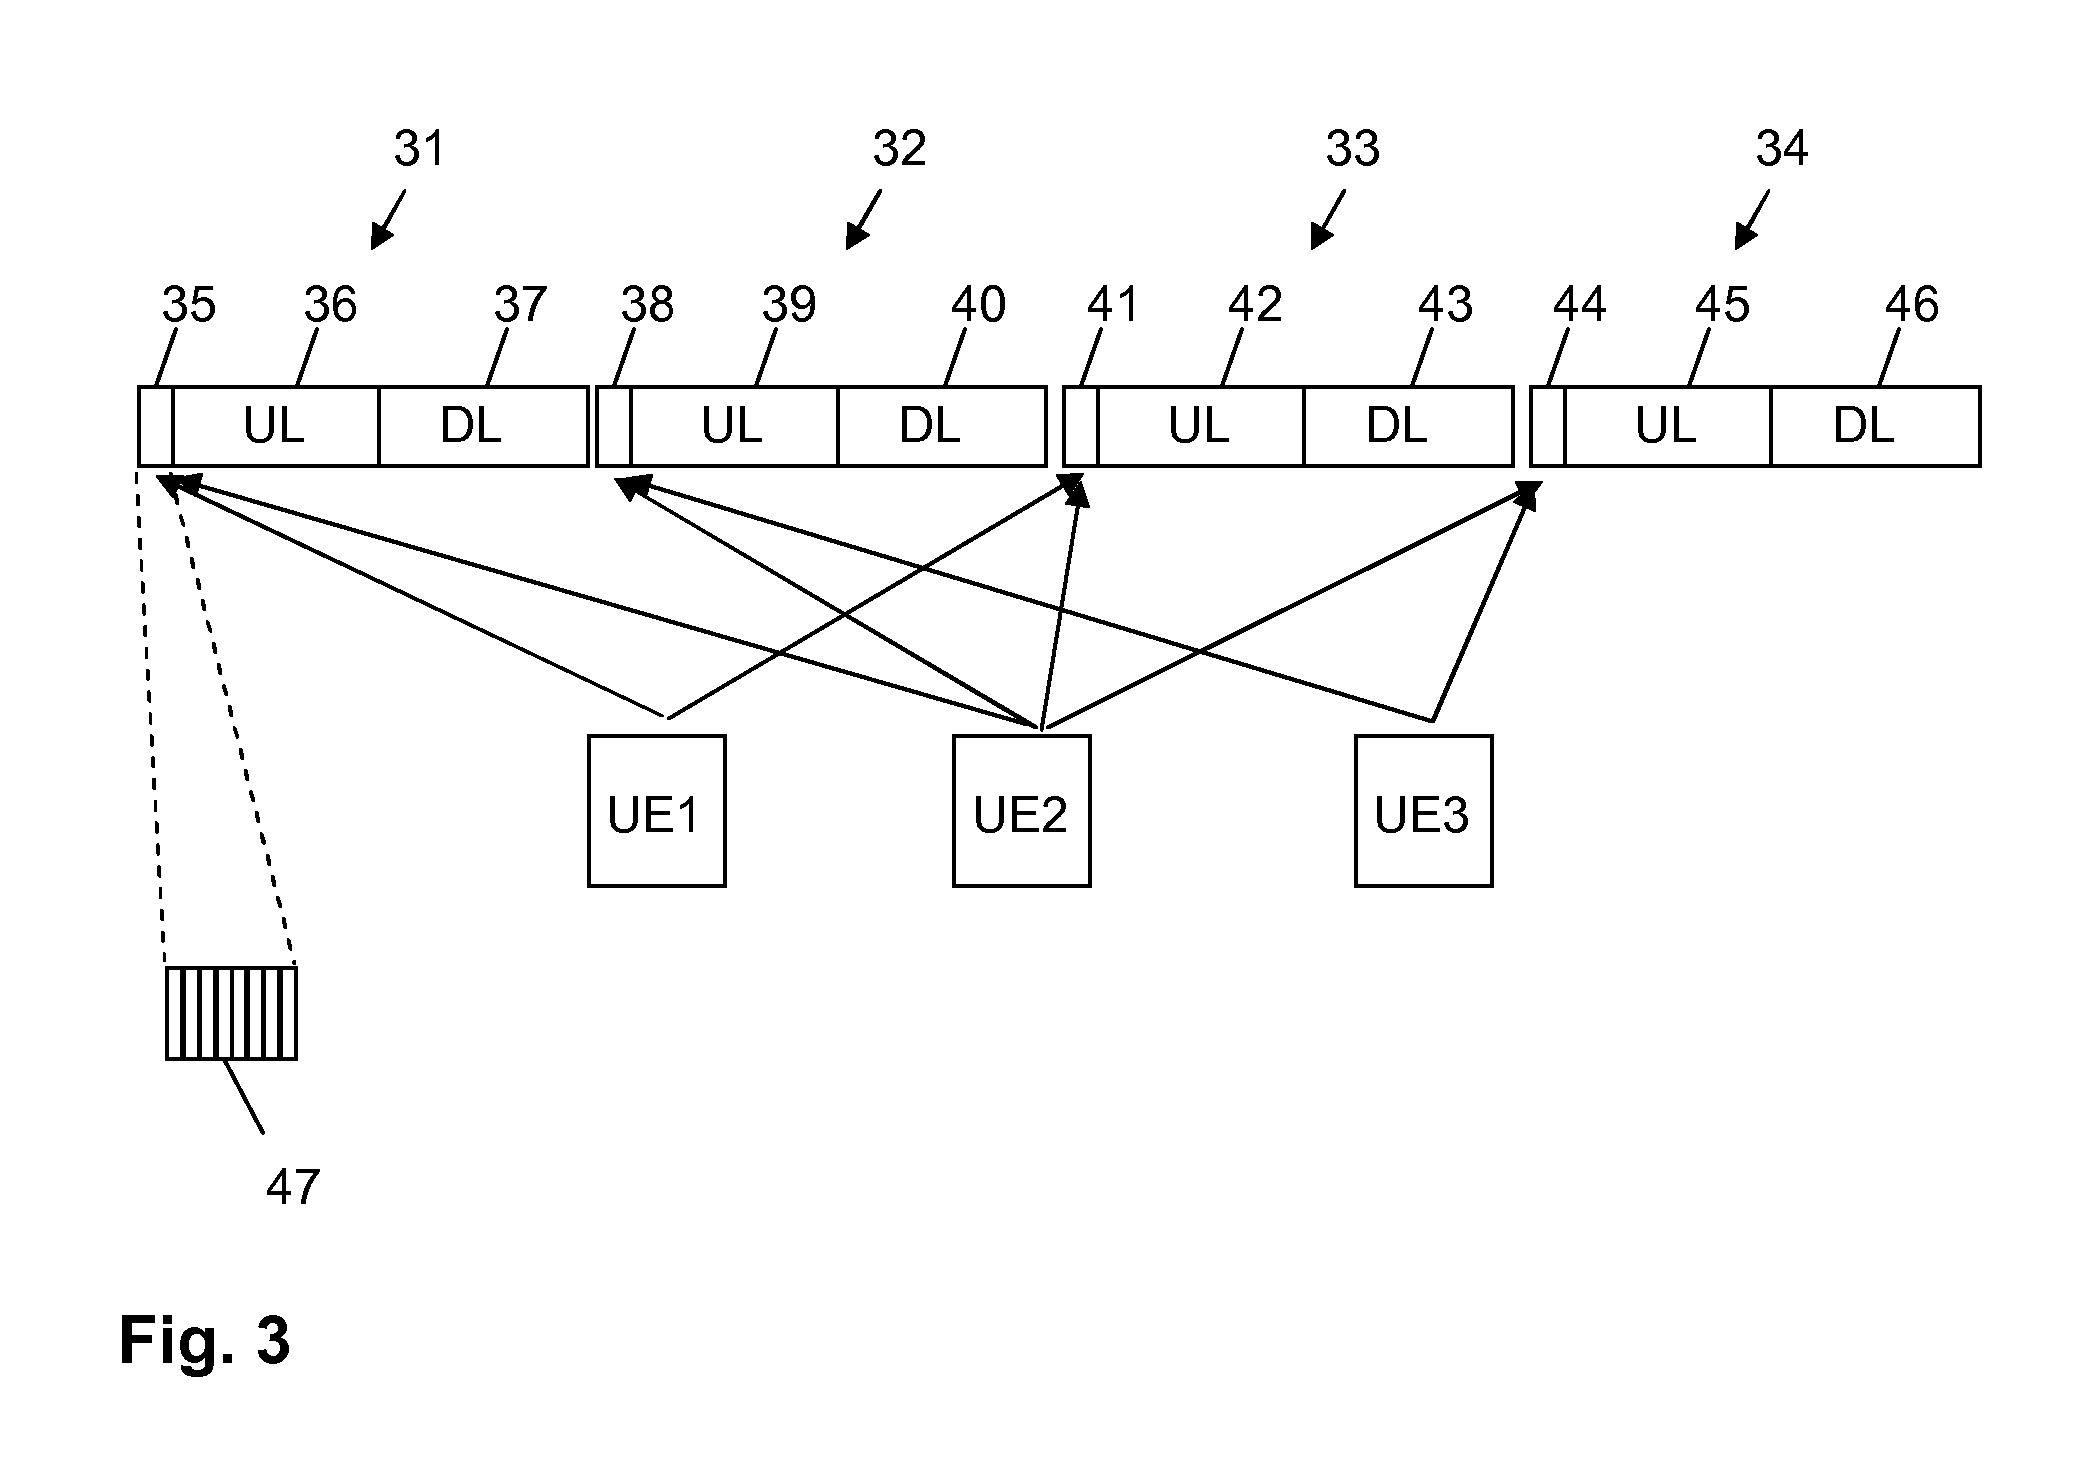 Method for operating a base station in a wireless radio network